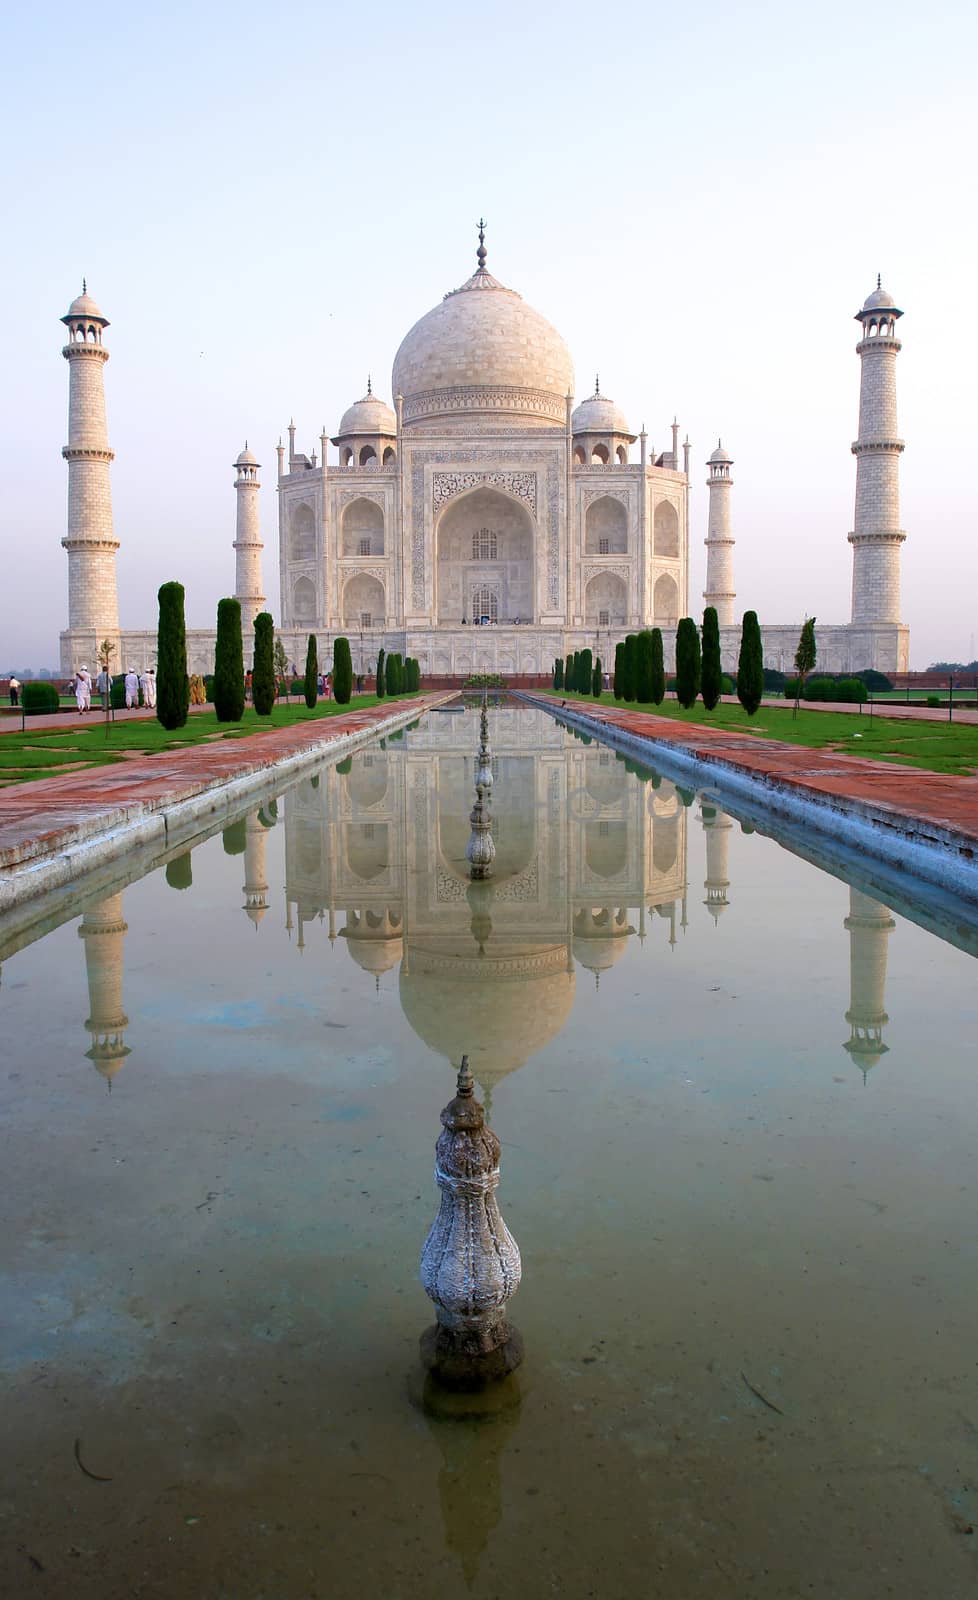 Overview of the Taj Mahal and garden, Agra, India